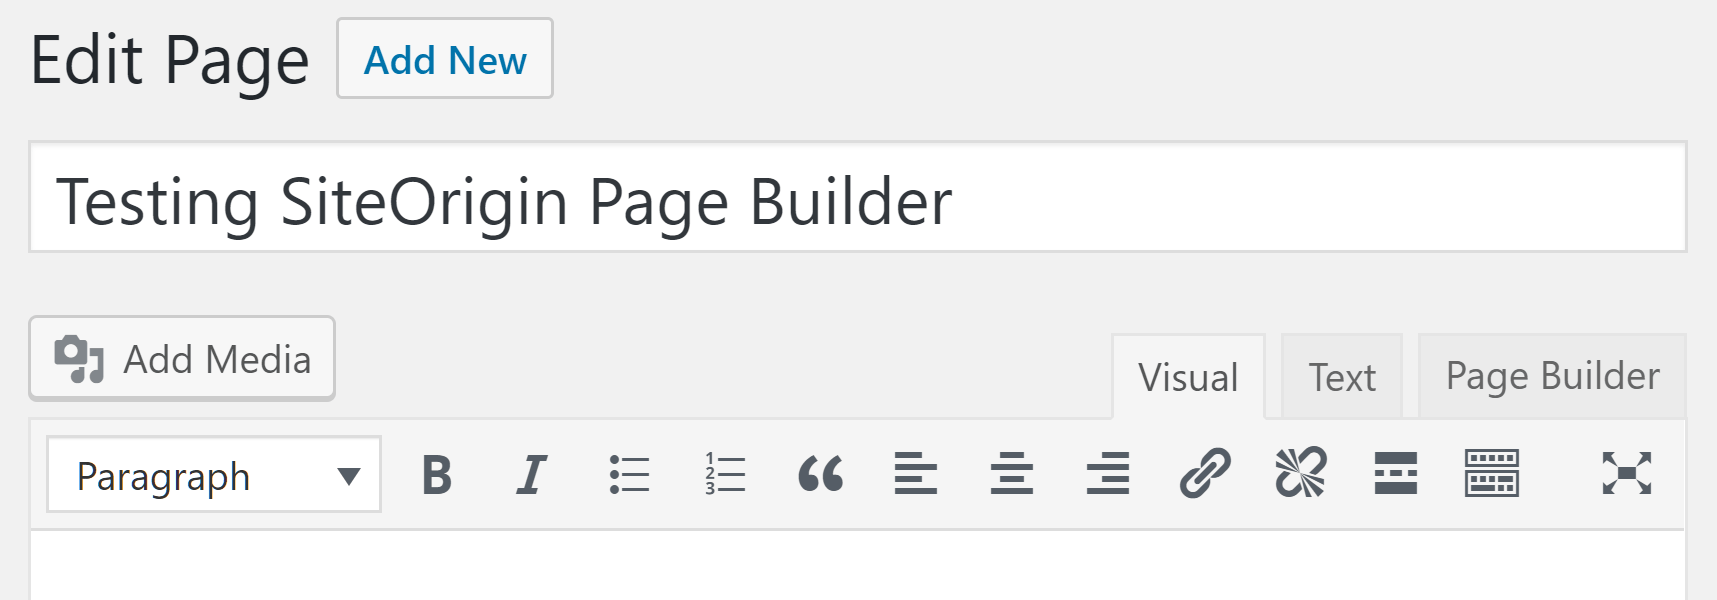 Page Builder Editor Buttons